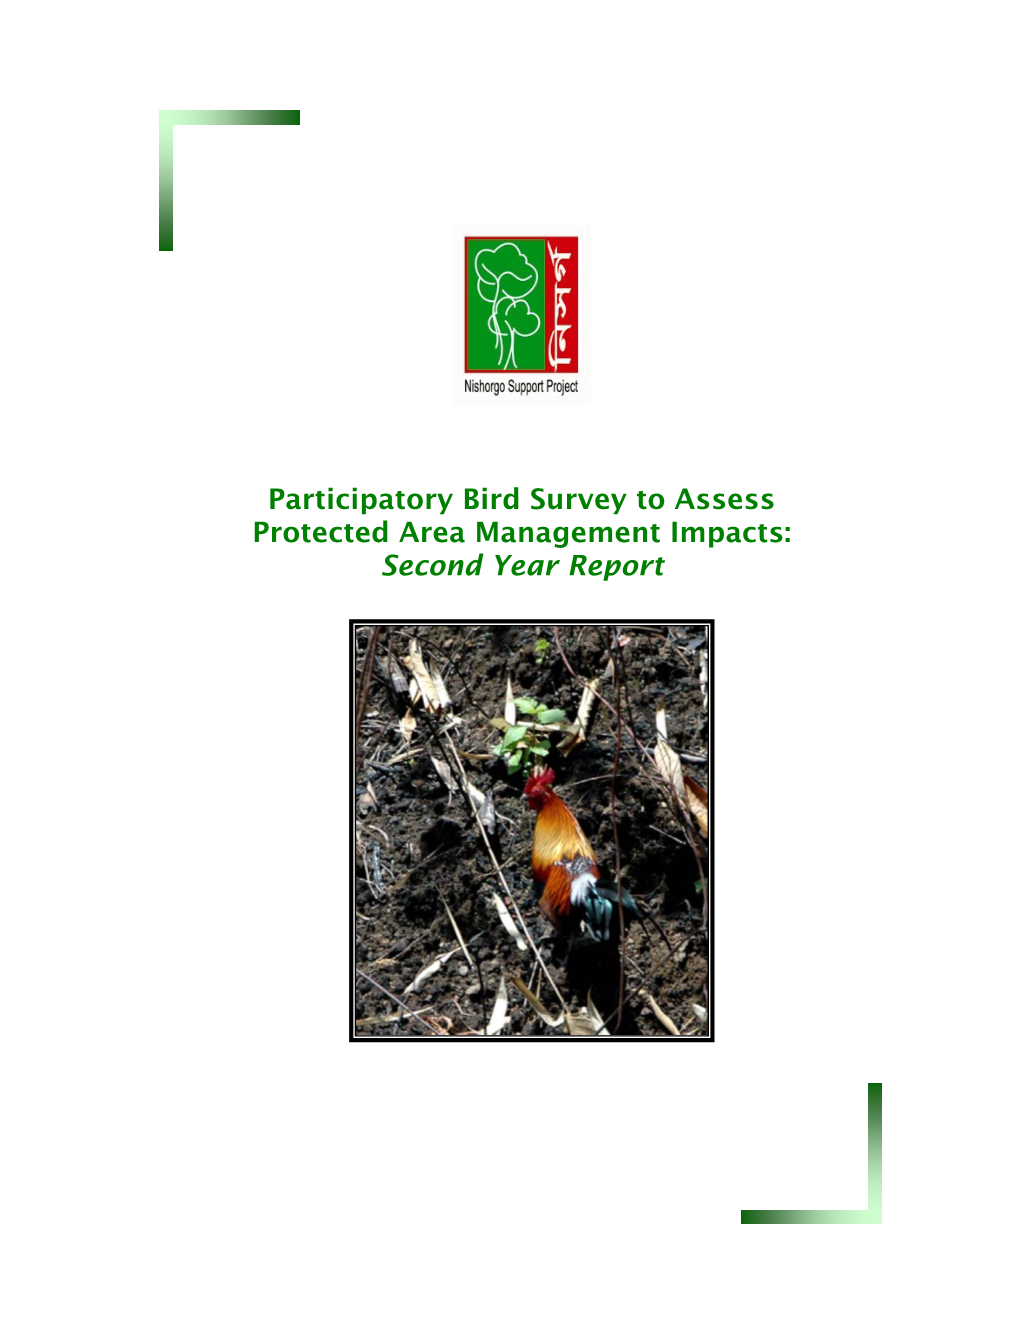 Participatory Bird Survey to Assess Protected Area Management Impacts: Second Year Report